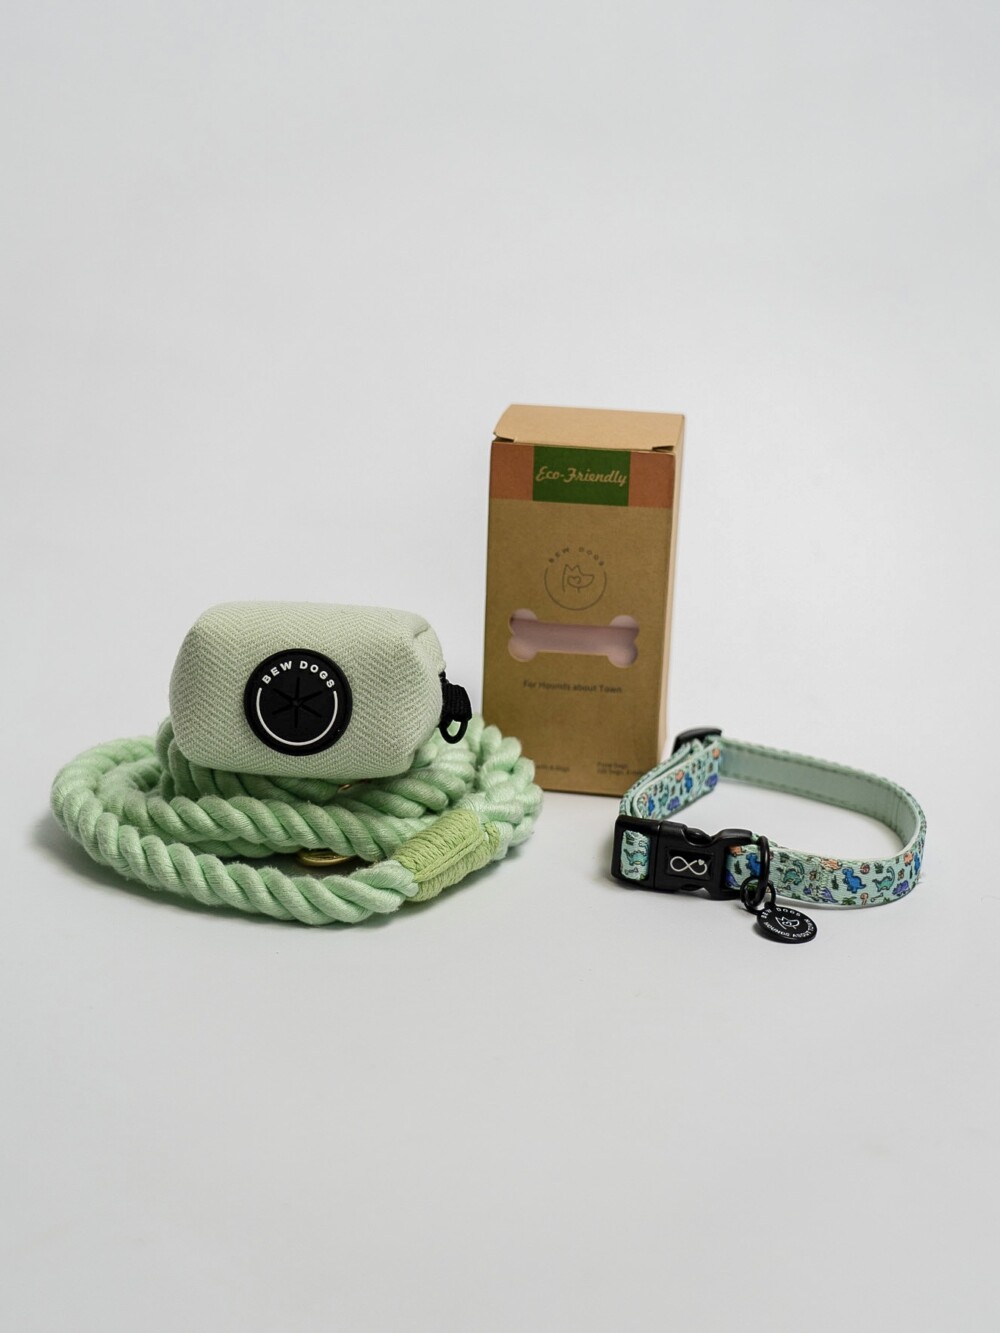 A mint green rope lead, herringbone poop bag holder, a box of eco-friendly poop bags and a blue/green collar, against a white background.